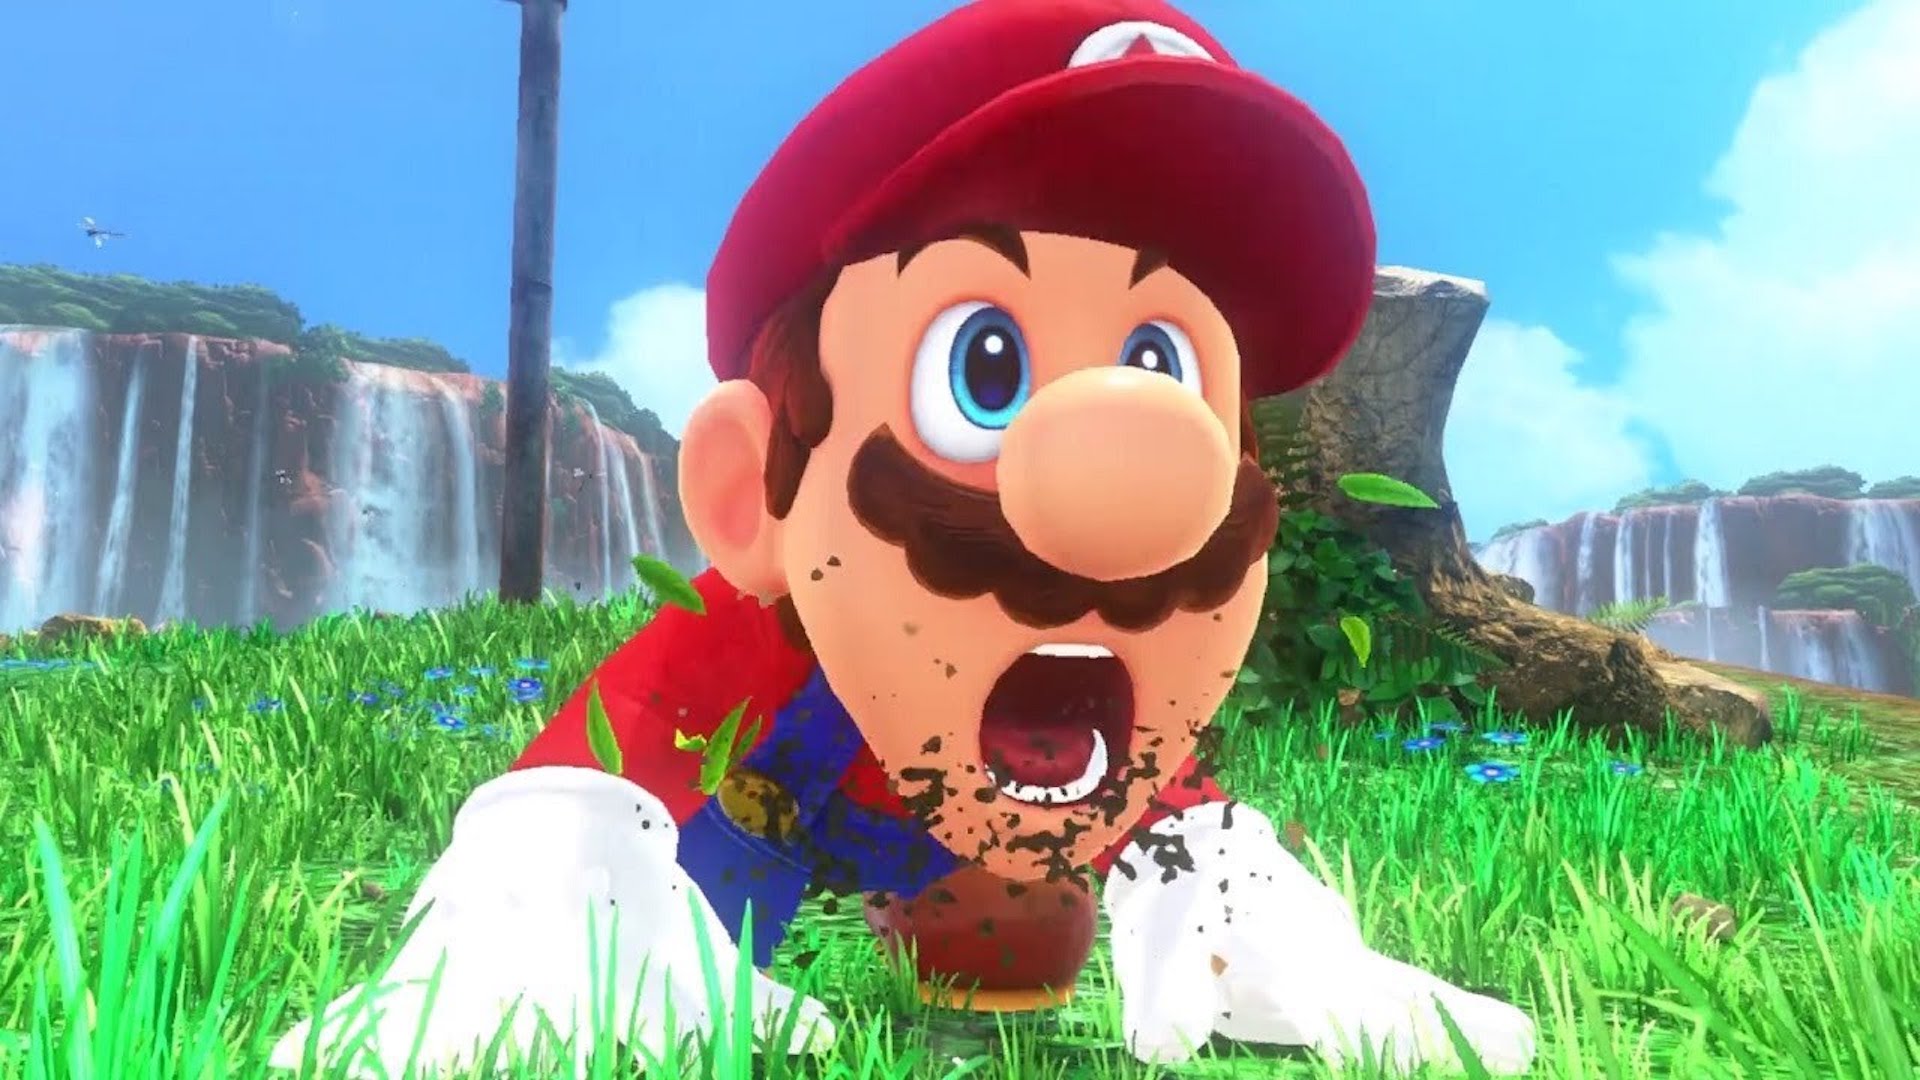 Super Mario 3d All Stars Reveal Coming August 28th - Rumor